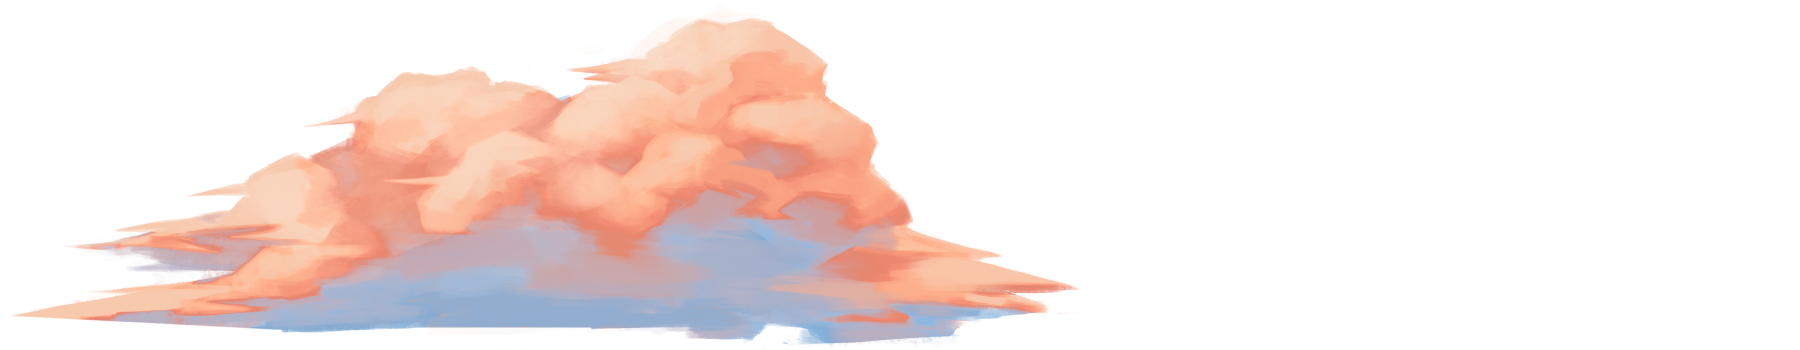 pink cloud formation